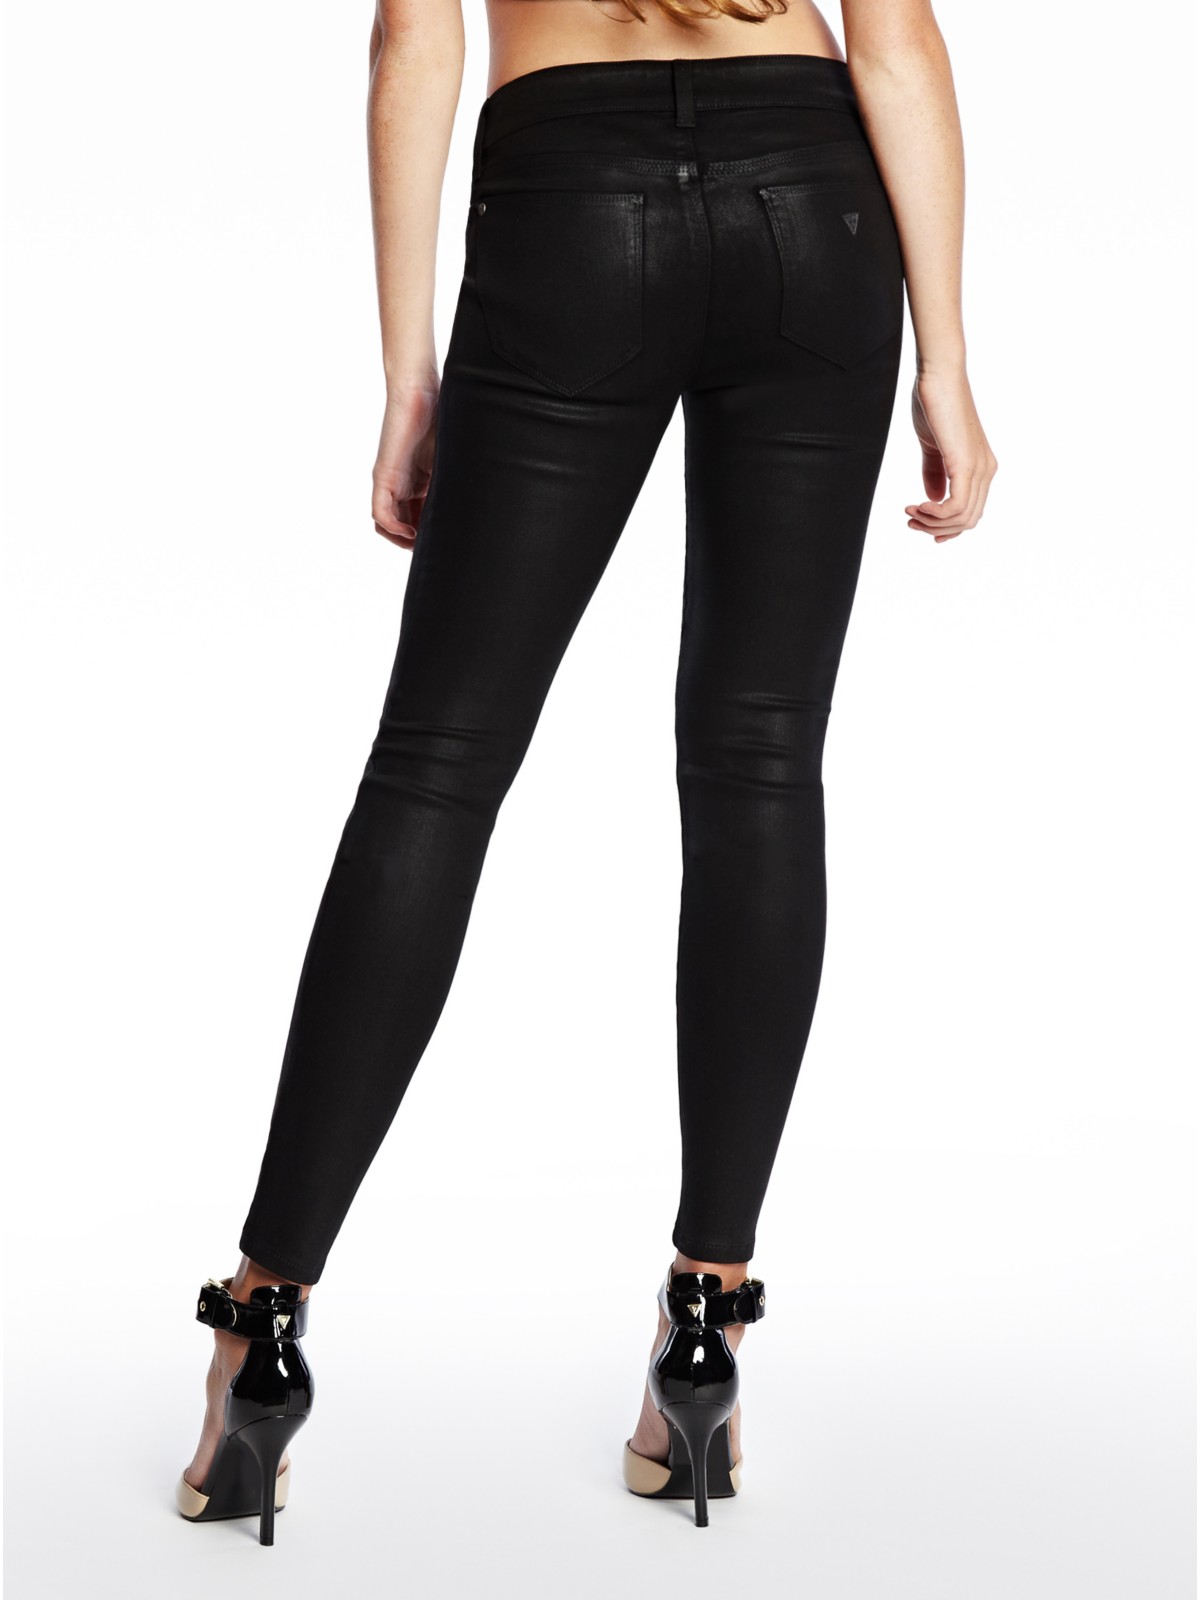 GUESS Sienna Coated Curvy Skinny Jeans